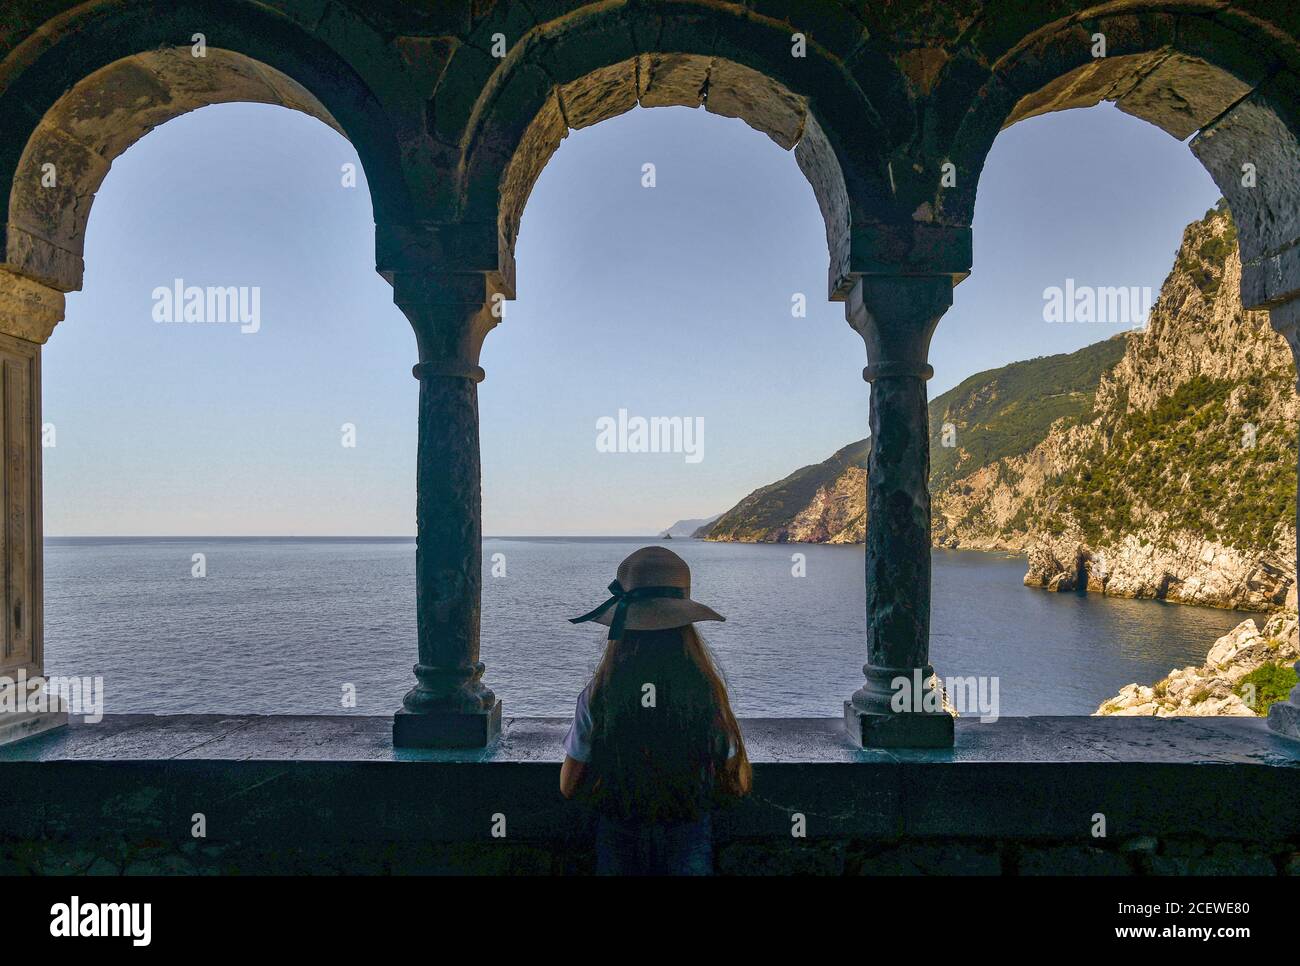 Little girl from behind admiring the view from an arcade of the Church of St Peter in the fishing village of Porto Venere, La Spezia, Liguria, Italy Stock Photo